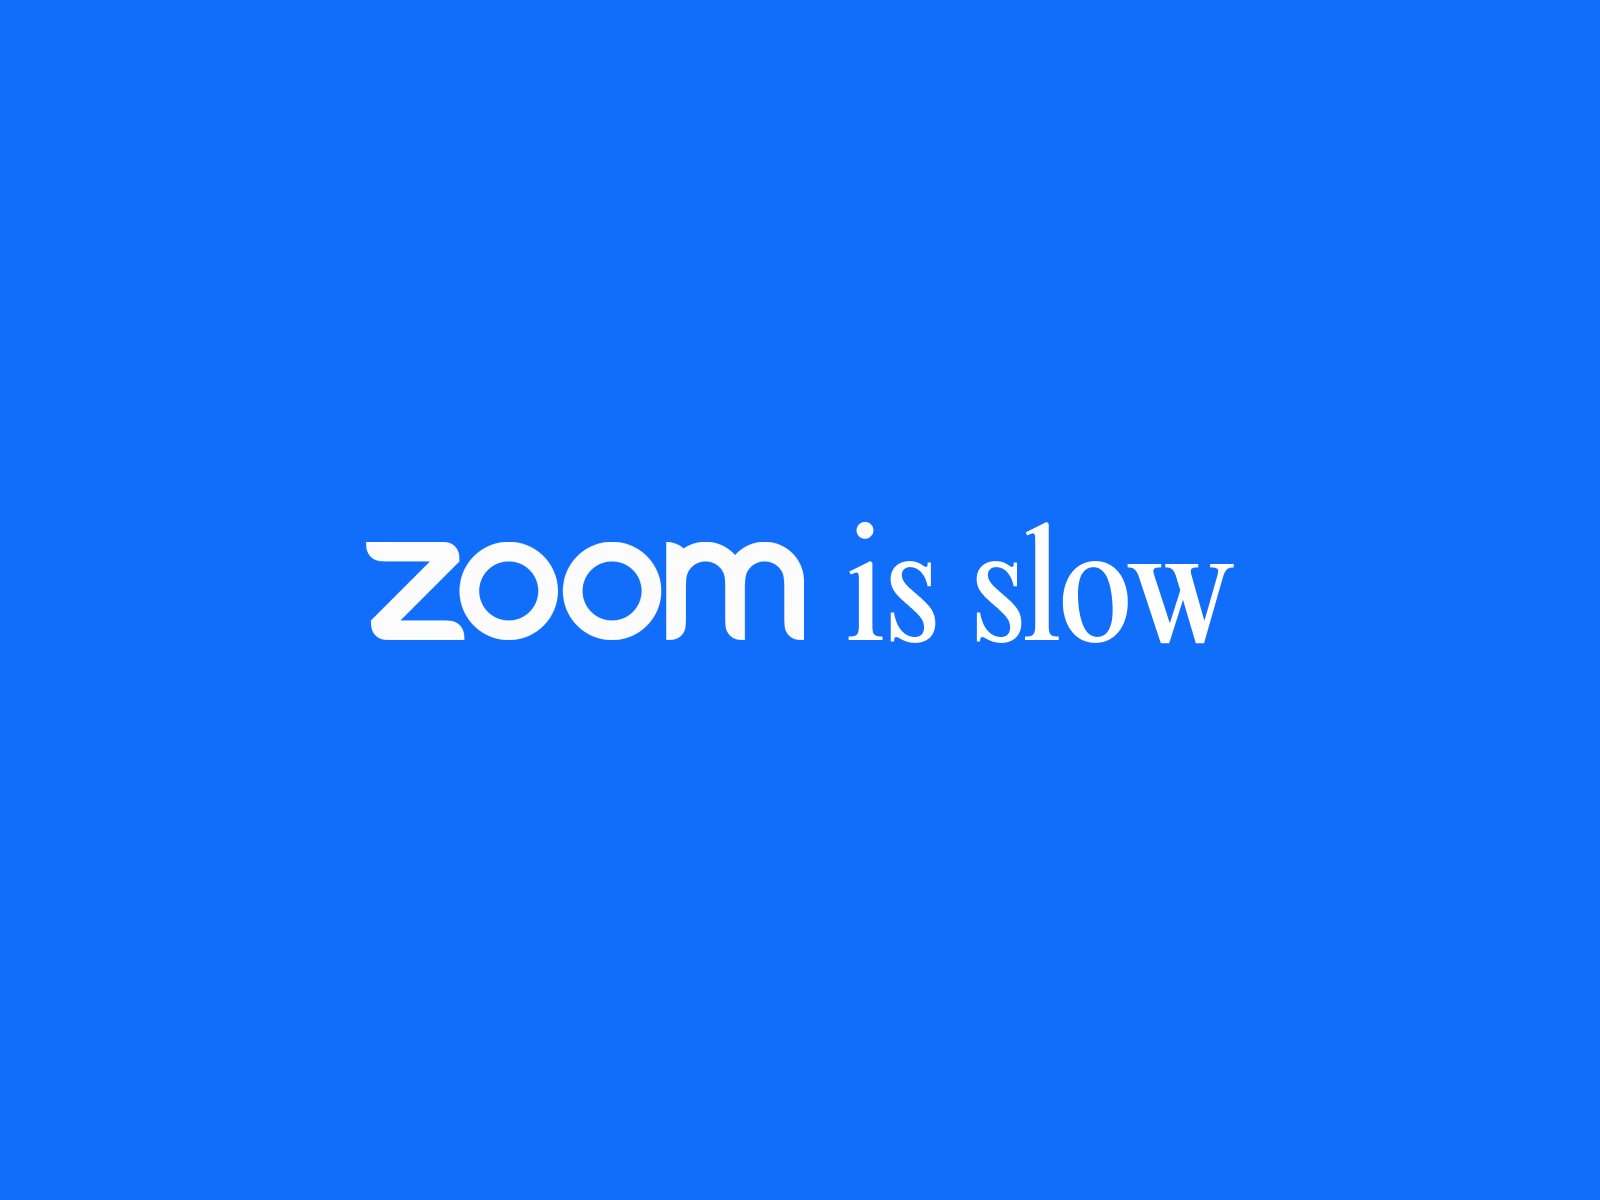 zoom is slow